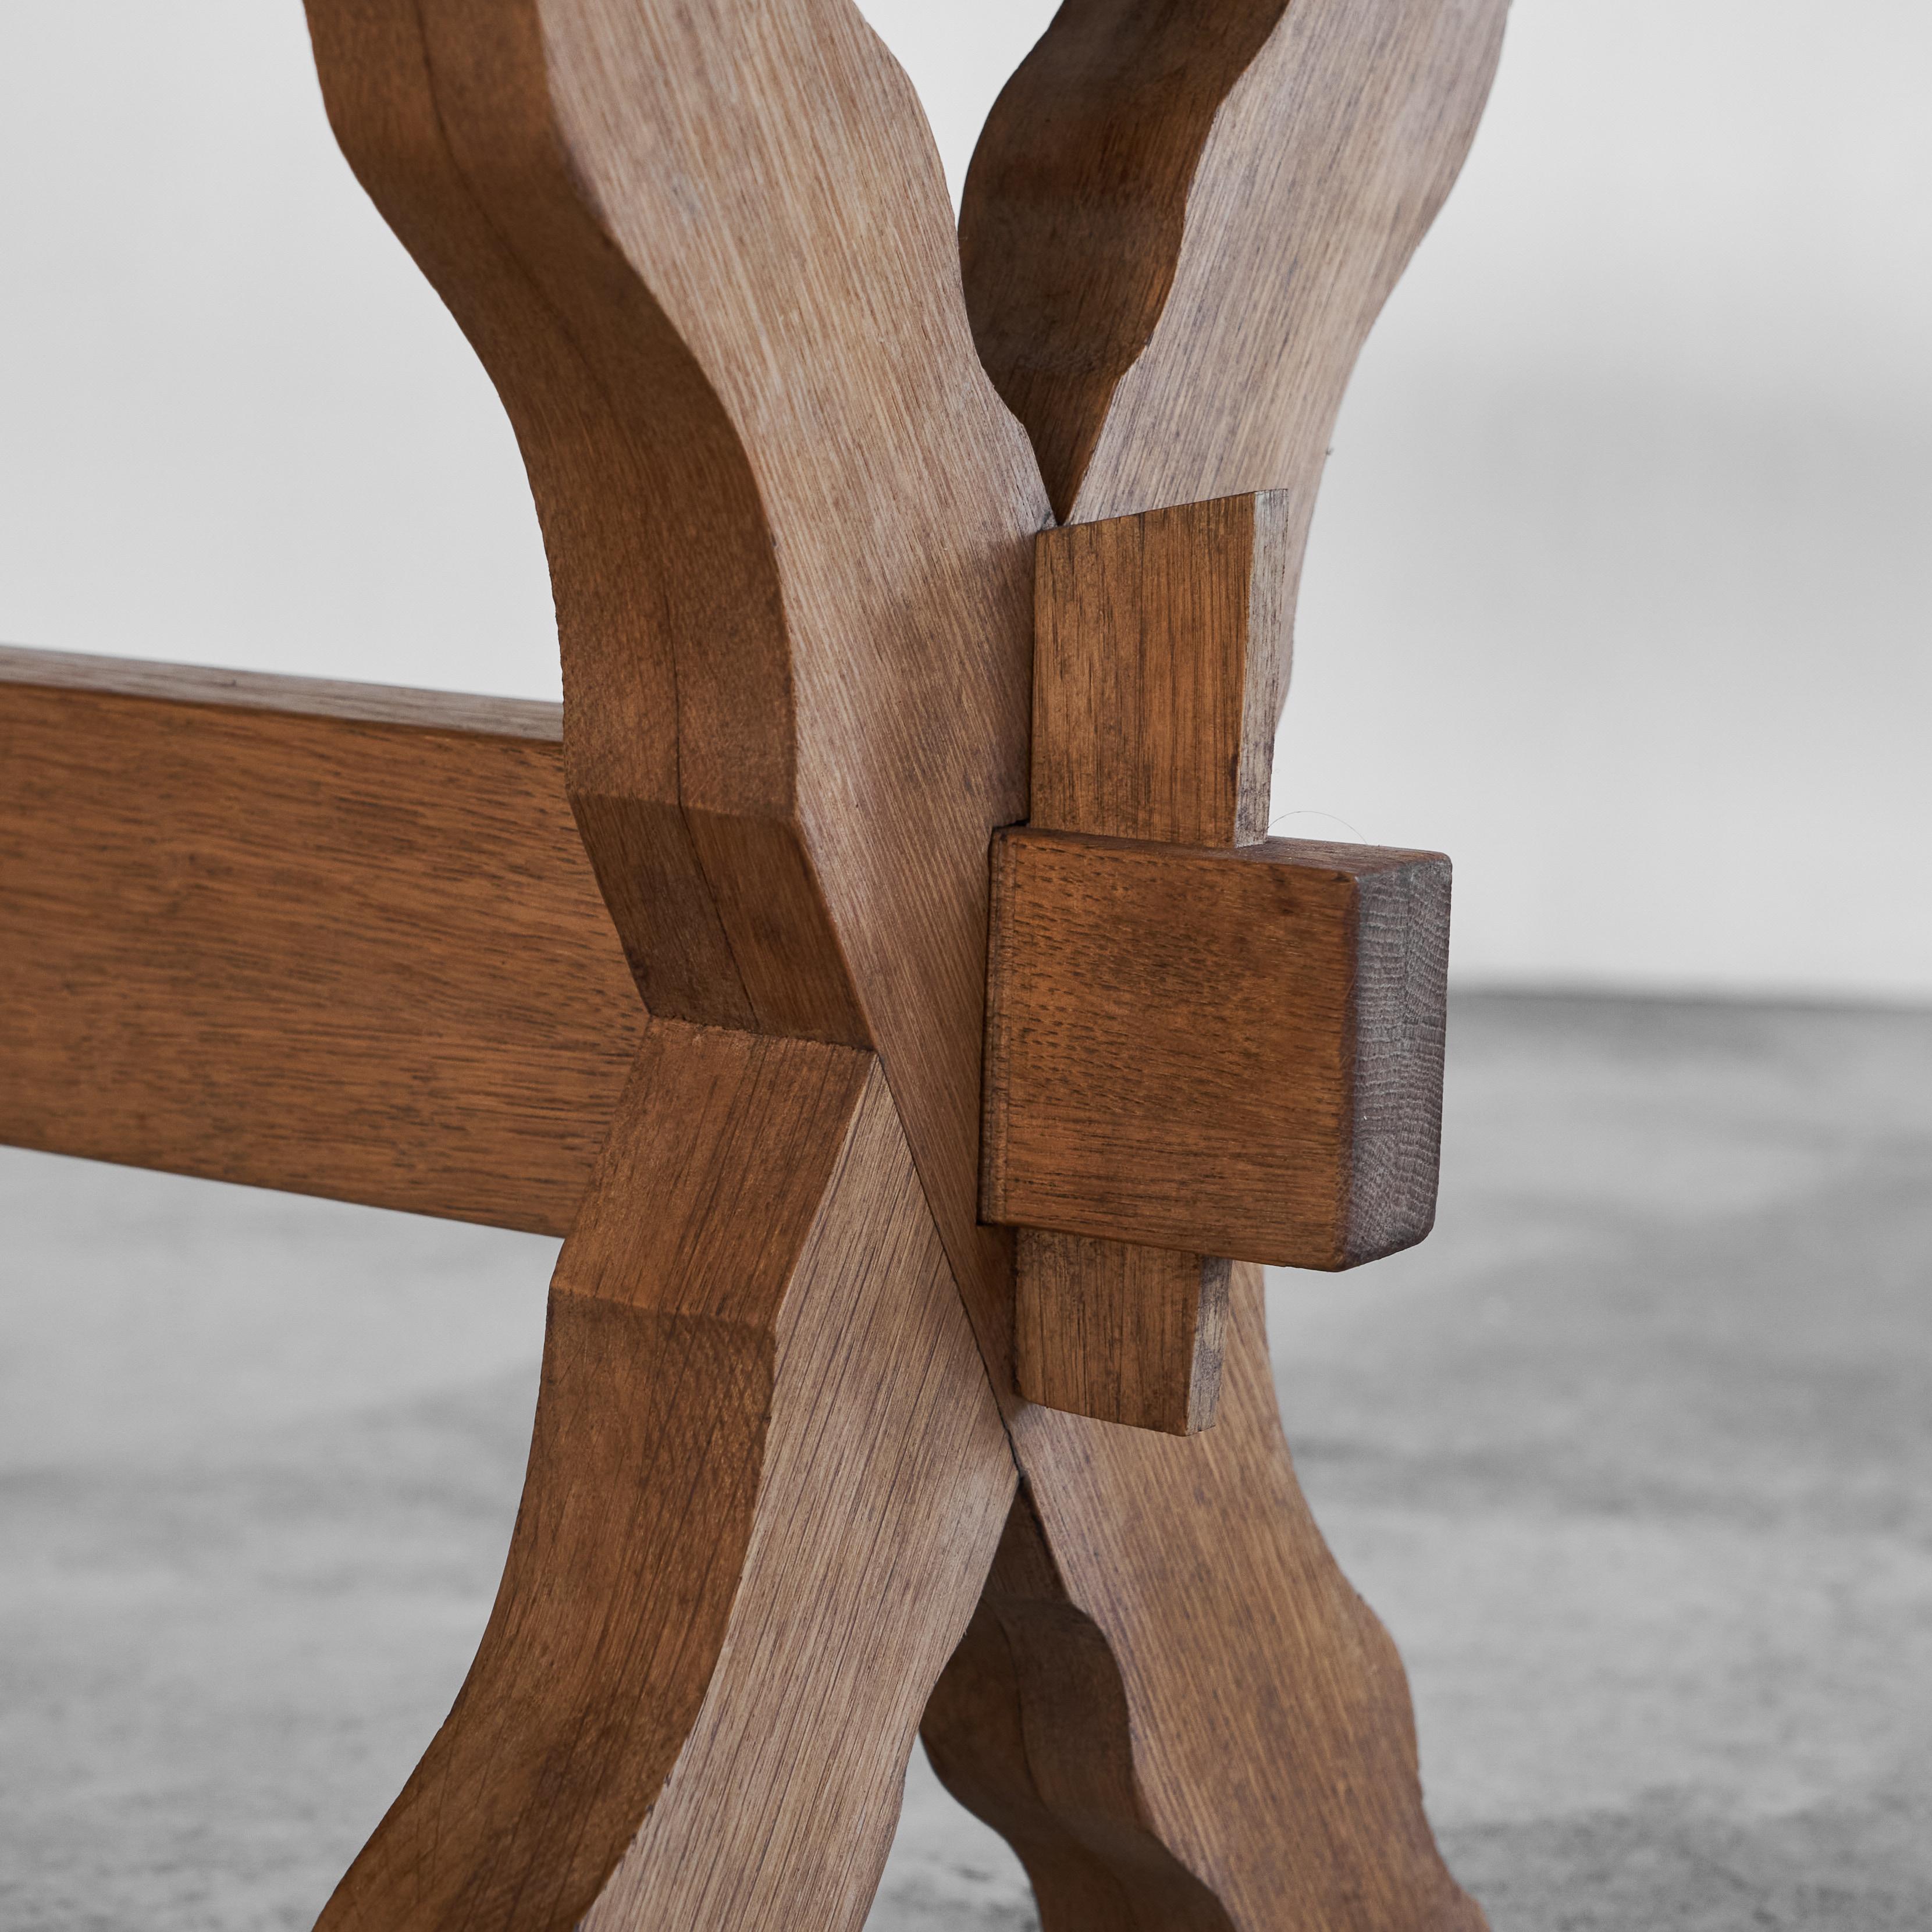 Hand-Crafted Sculptural Cross Legged Side Table in Solid Wood 1940s For Sale